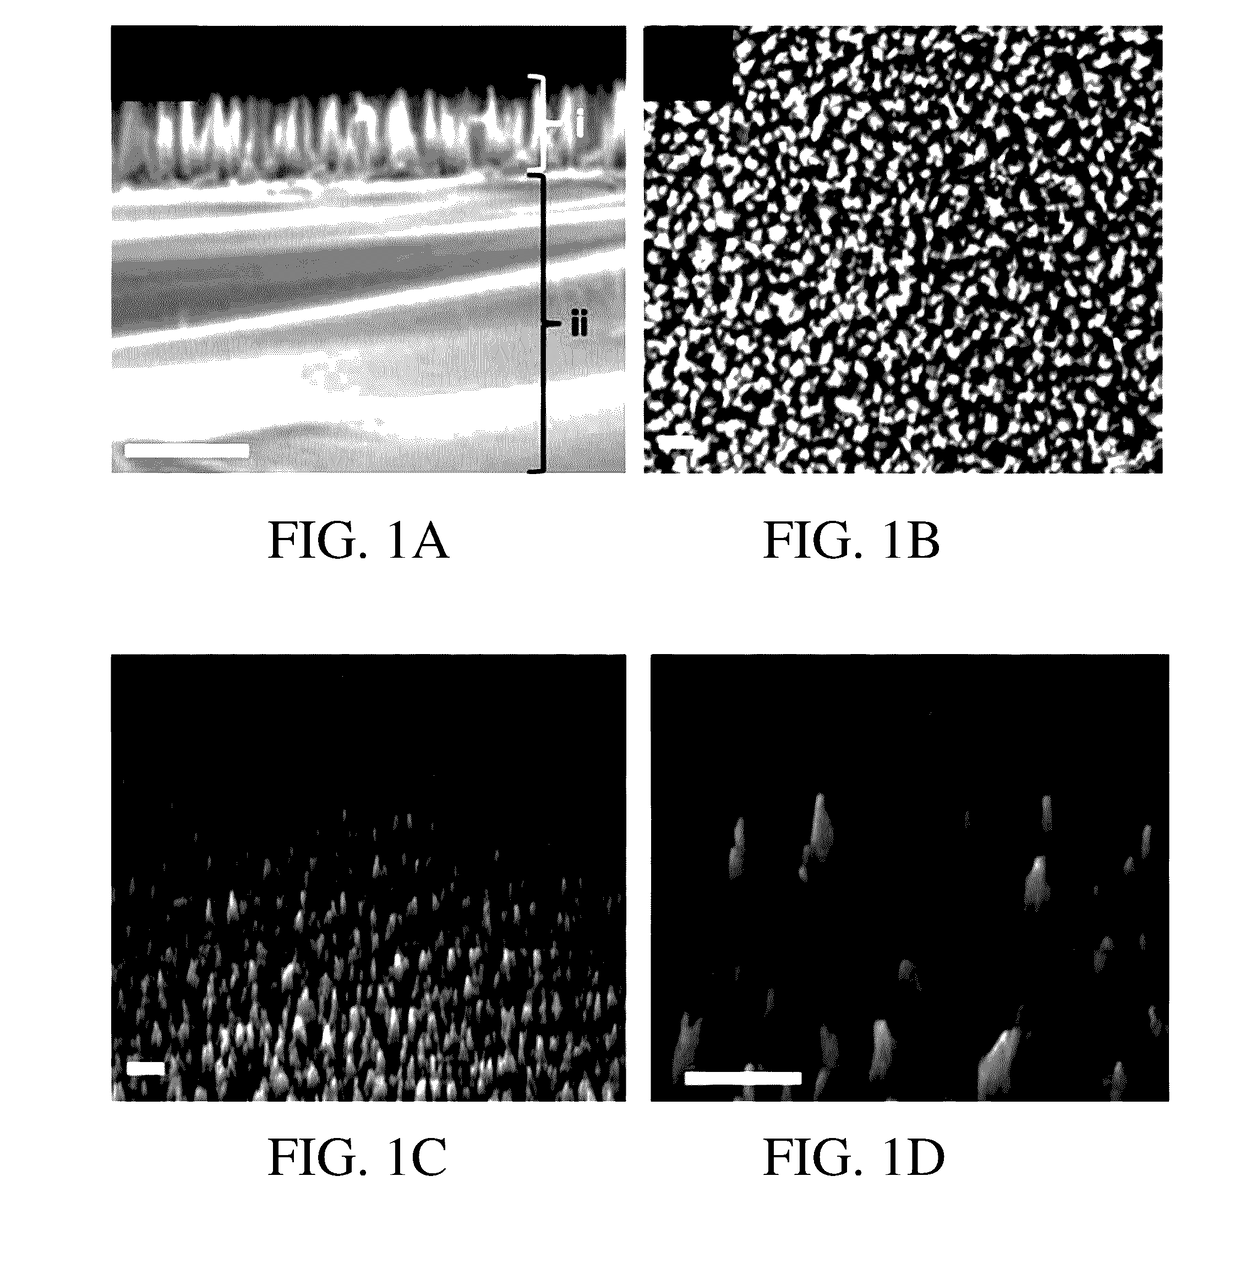 Processing of superhydrophobic, infrared transmissive, Anti-reflective nanostructured surfaces